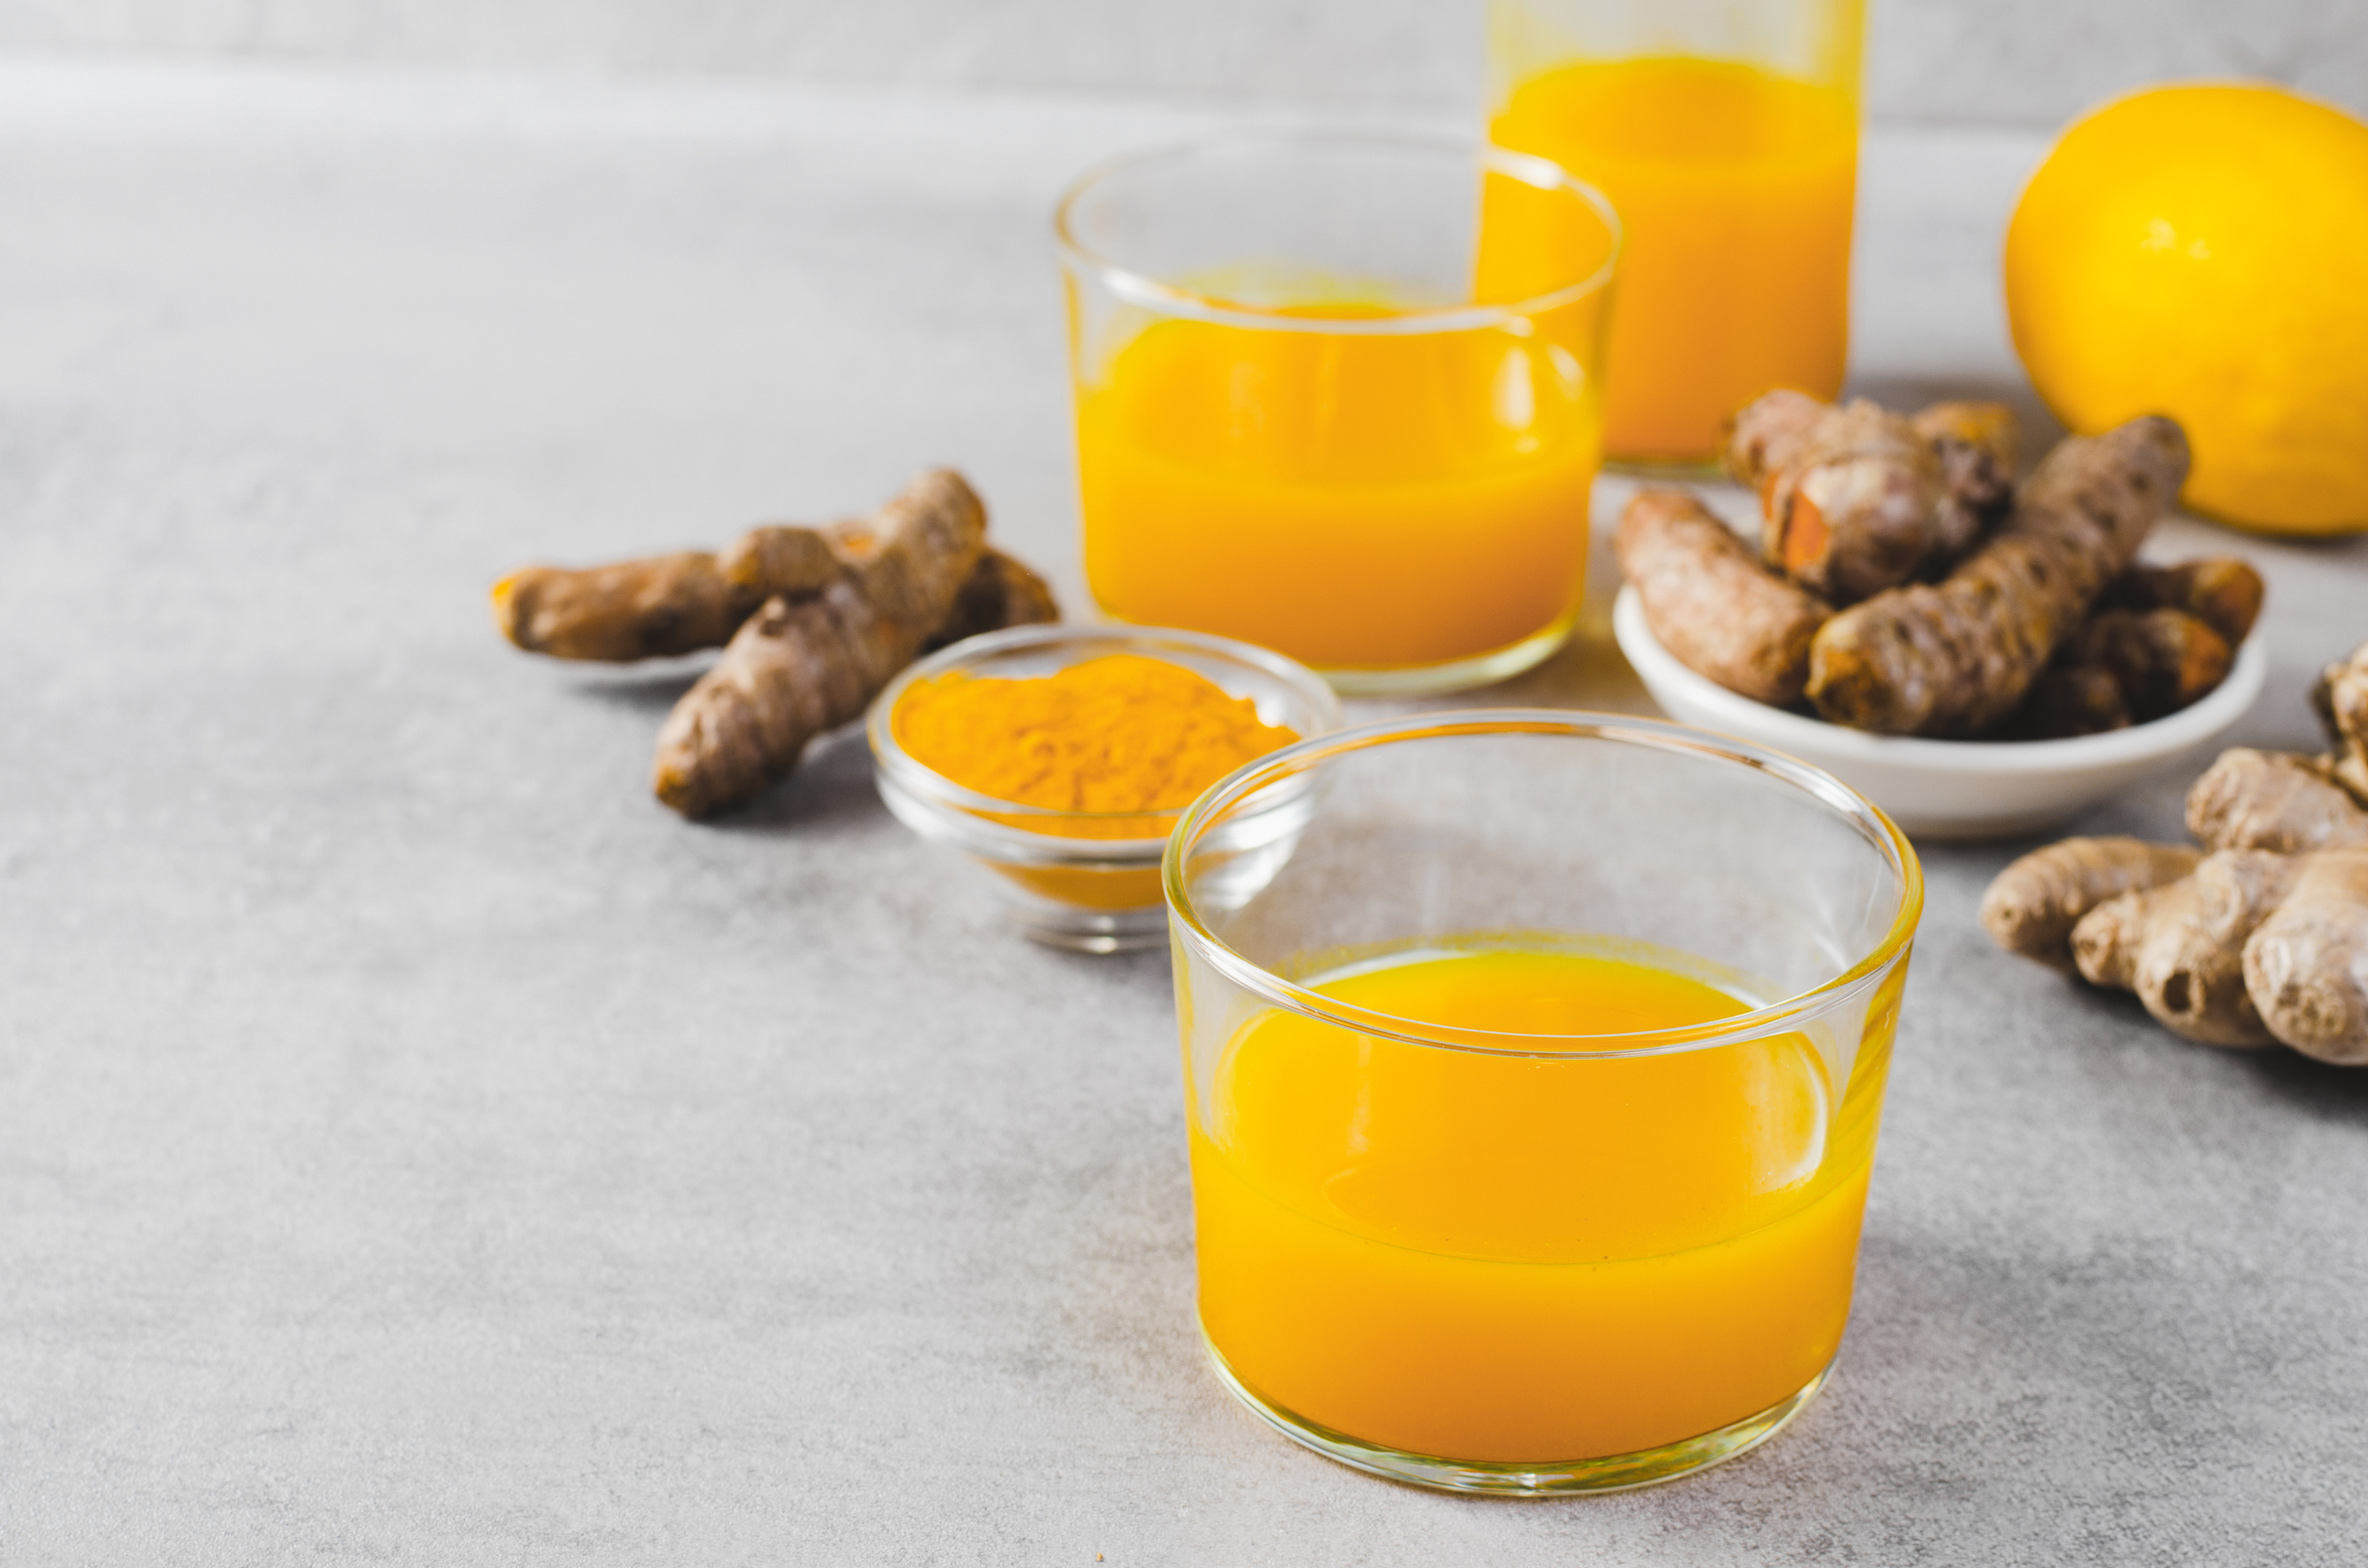 Turmeric Shots, Healthy Beverage with Turmeric Root and Spices, Jamu Juice, Immunity Booster Drink on Grey Background